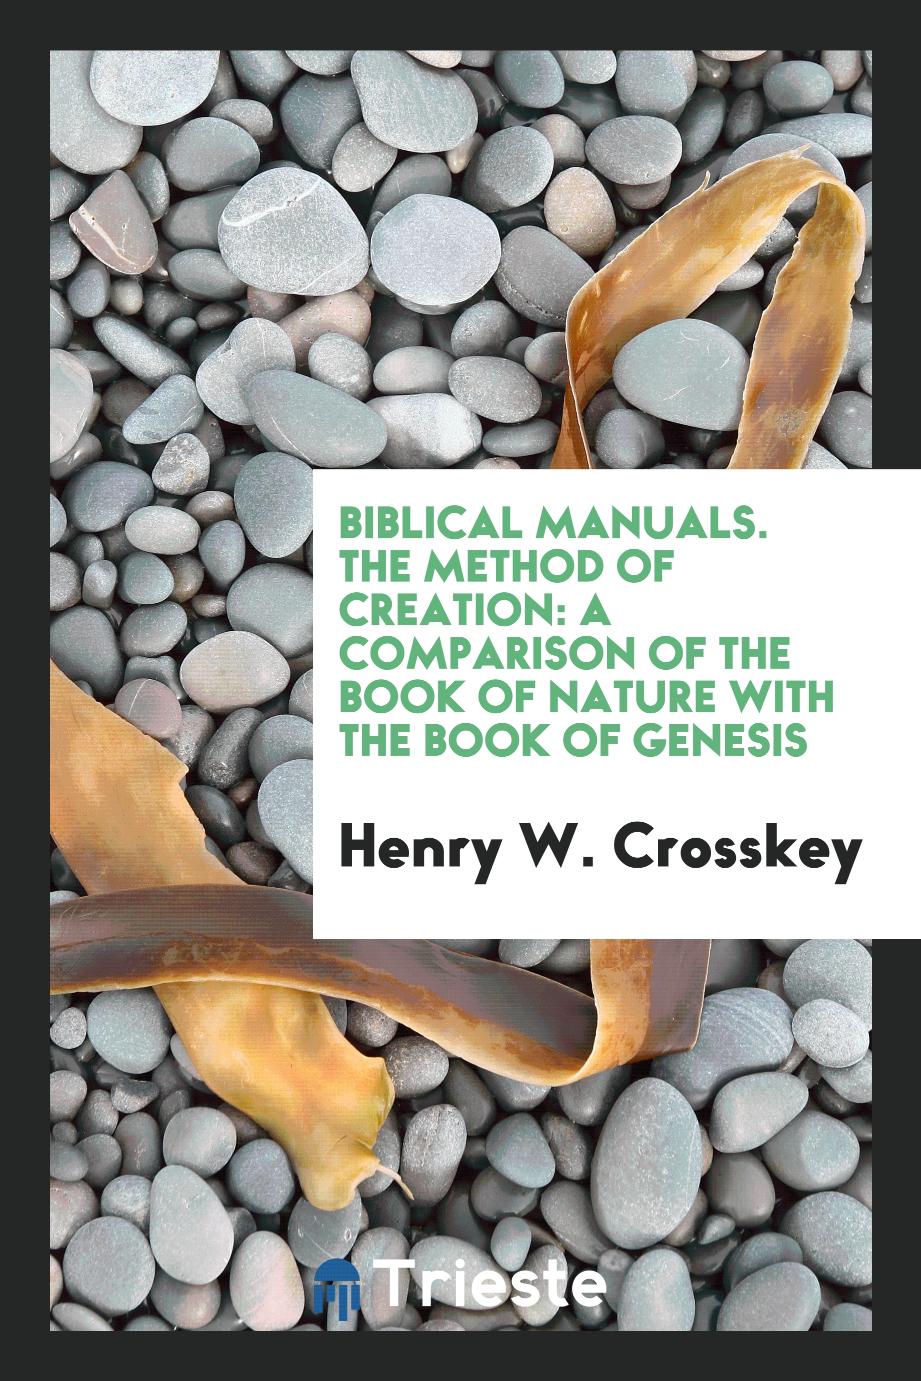 Biblical Manuals. The Method of Creation: A Comparison of the Book of Nature with the Book of Genesis